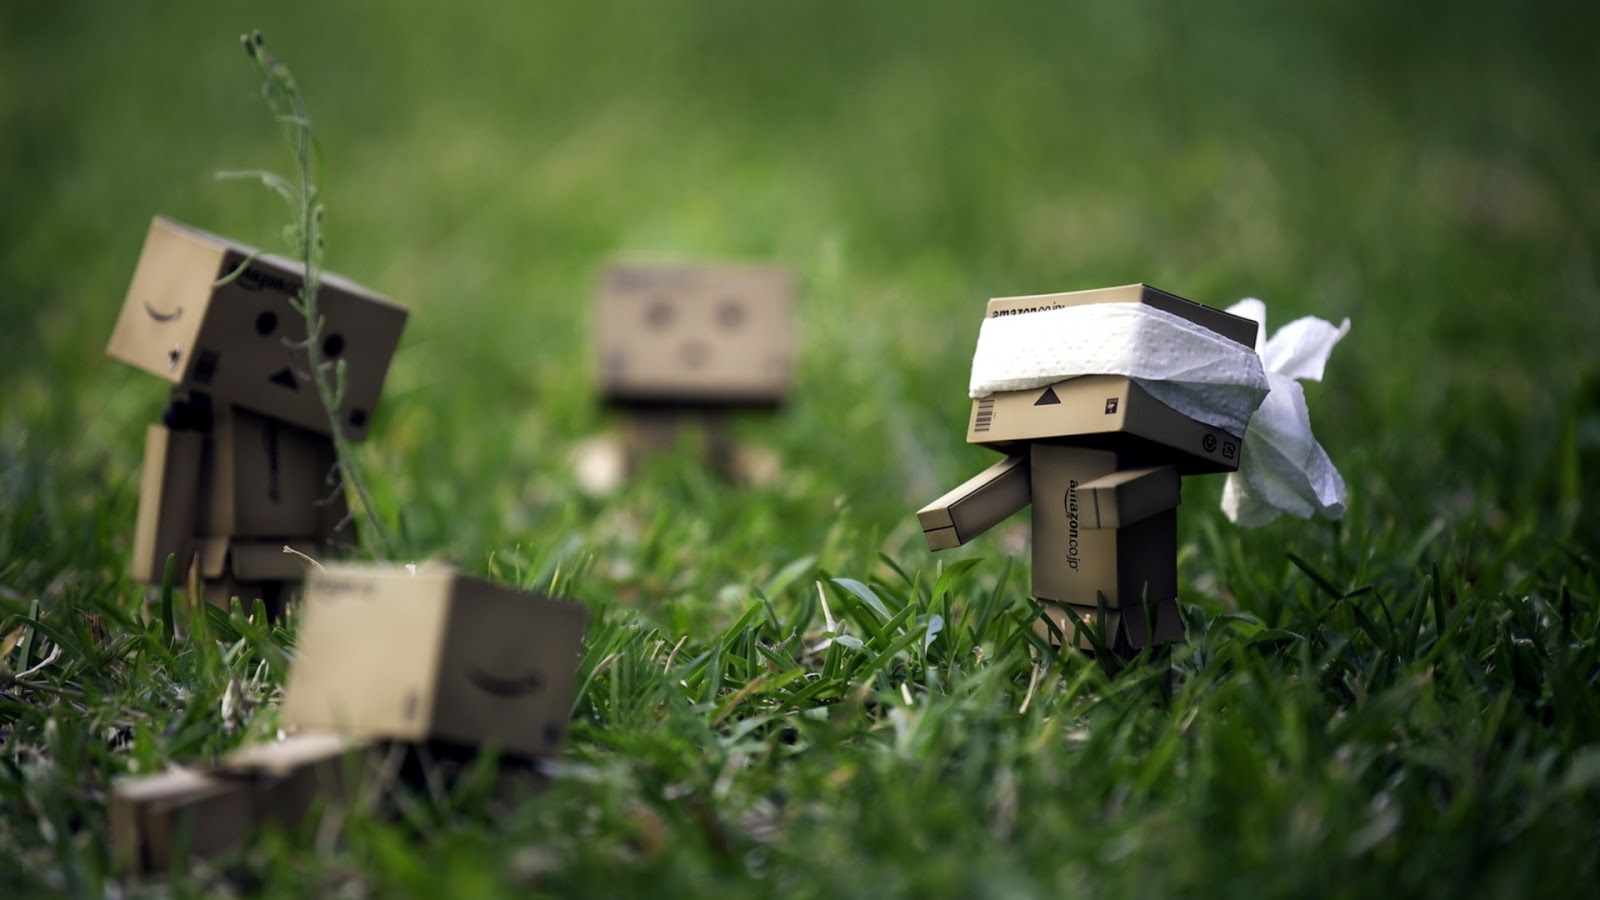 Danbo Wallpaper Of HD On The Grass Car Pictures